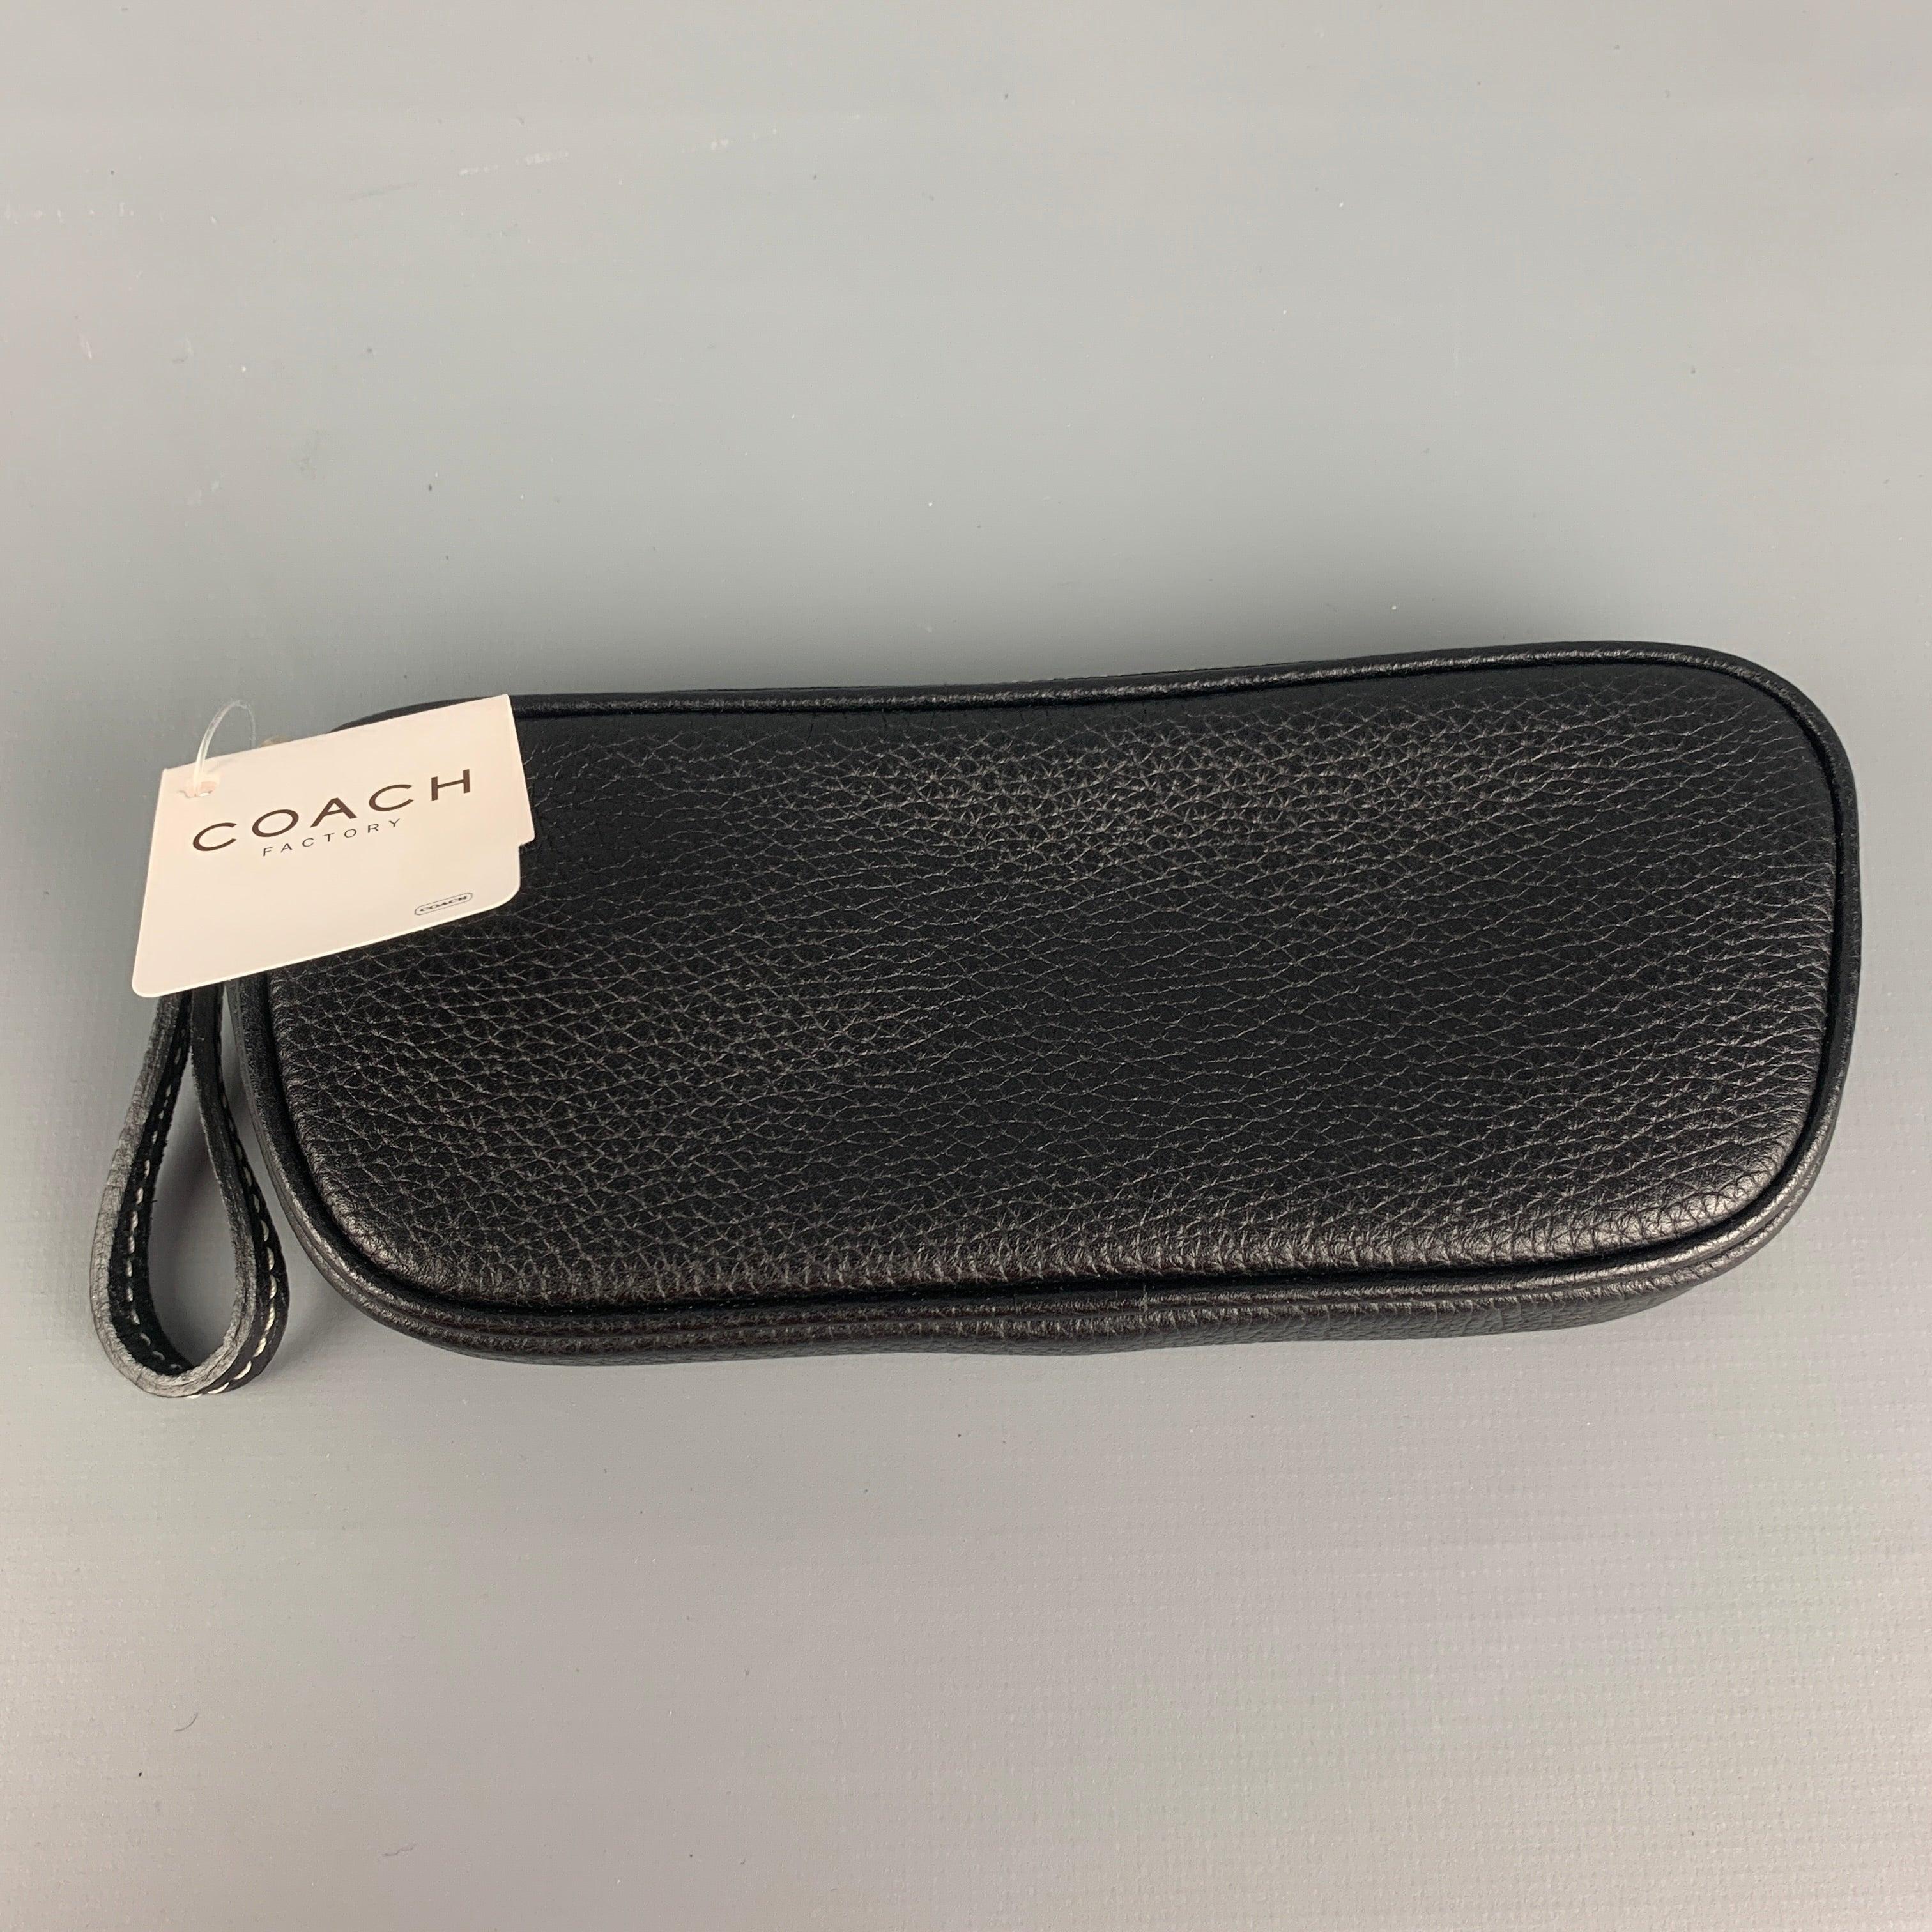 COACH coin purse comes in a black textured leather featuring a zipper closure.
New With Tags.
 

Measurements: 
  Length: 6.5 inches  Width: 0.75 inches  Height: 3 inches  
  
  
 
Reference: 94724
Category: Bags & Leather Goods
More Details
   